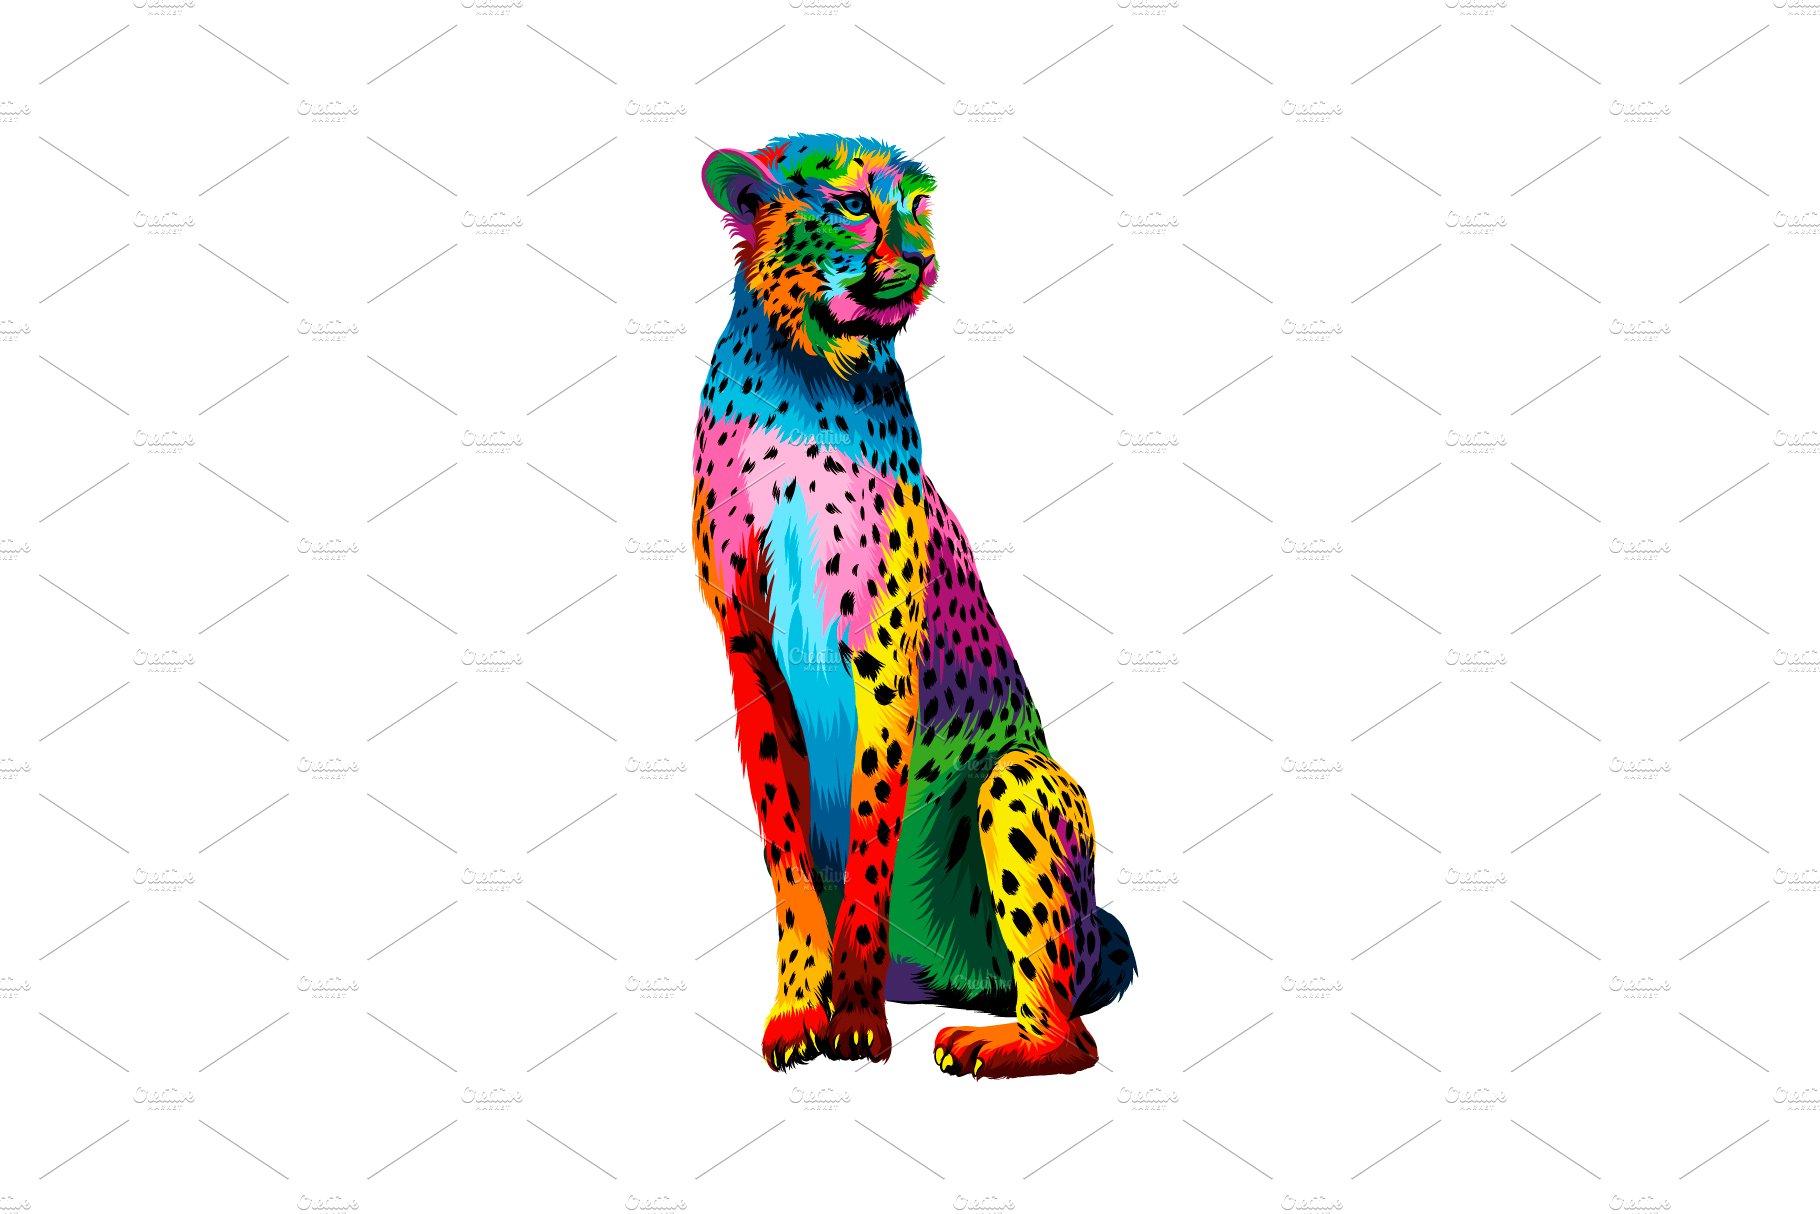 Cheetah from multicolored paints cover image.